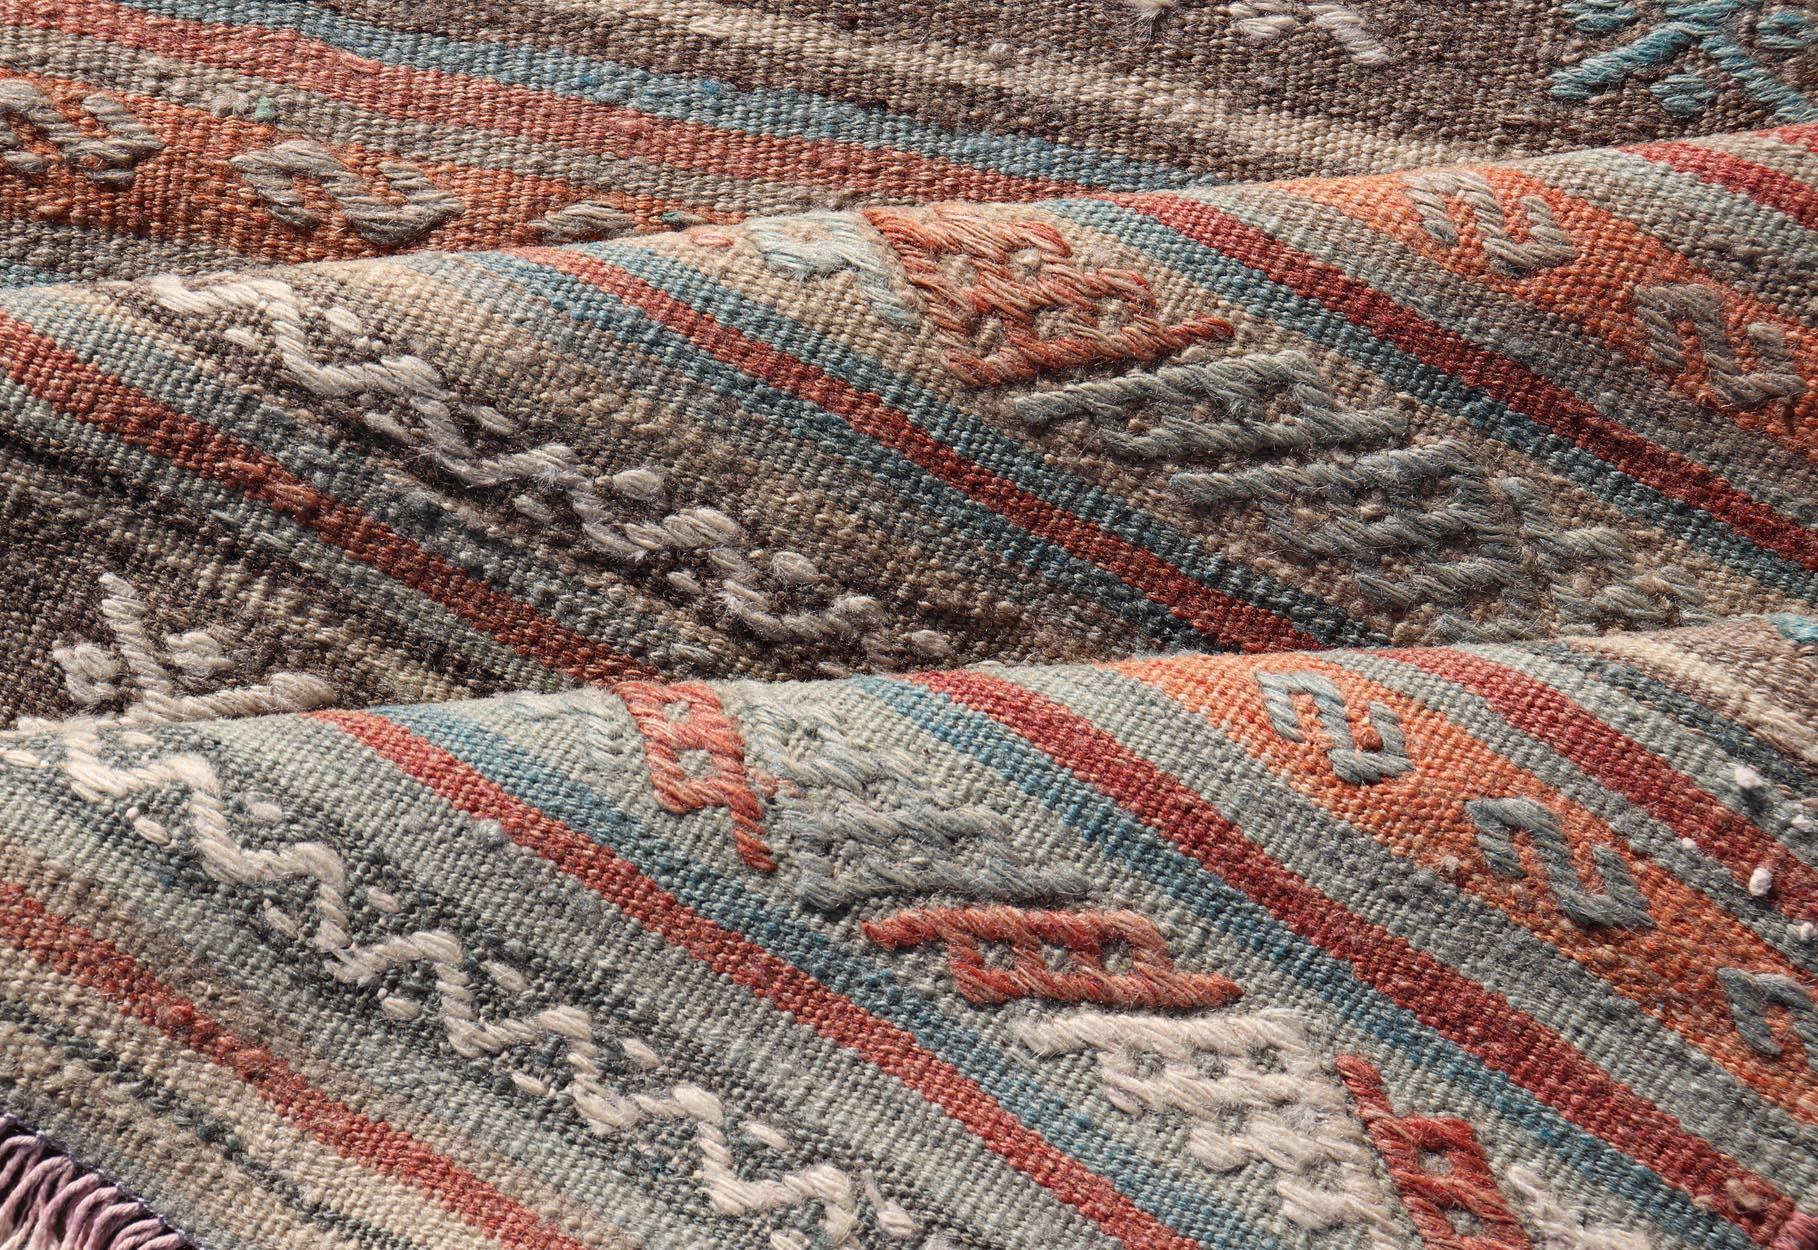 Turkish Vintage Kilim Runner with Horizontal Stripes in Bright Tones For Sale 3